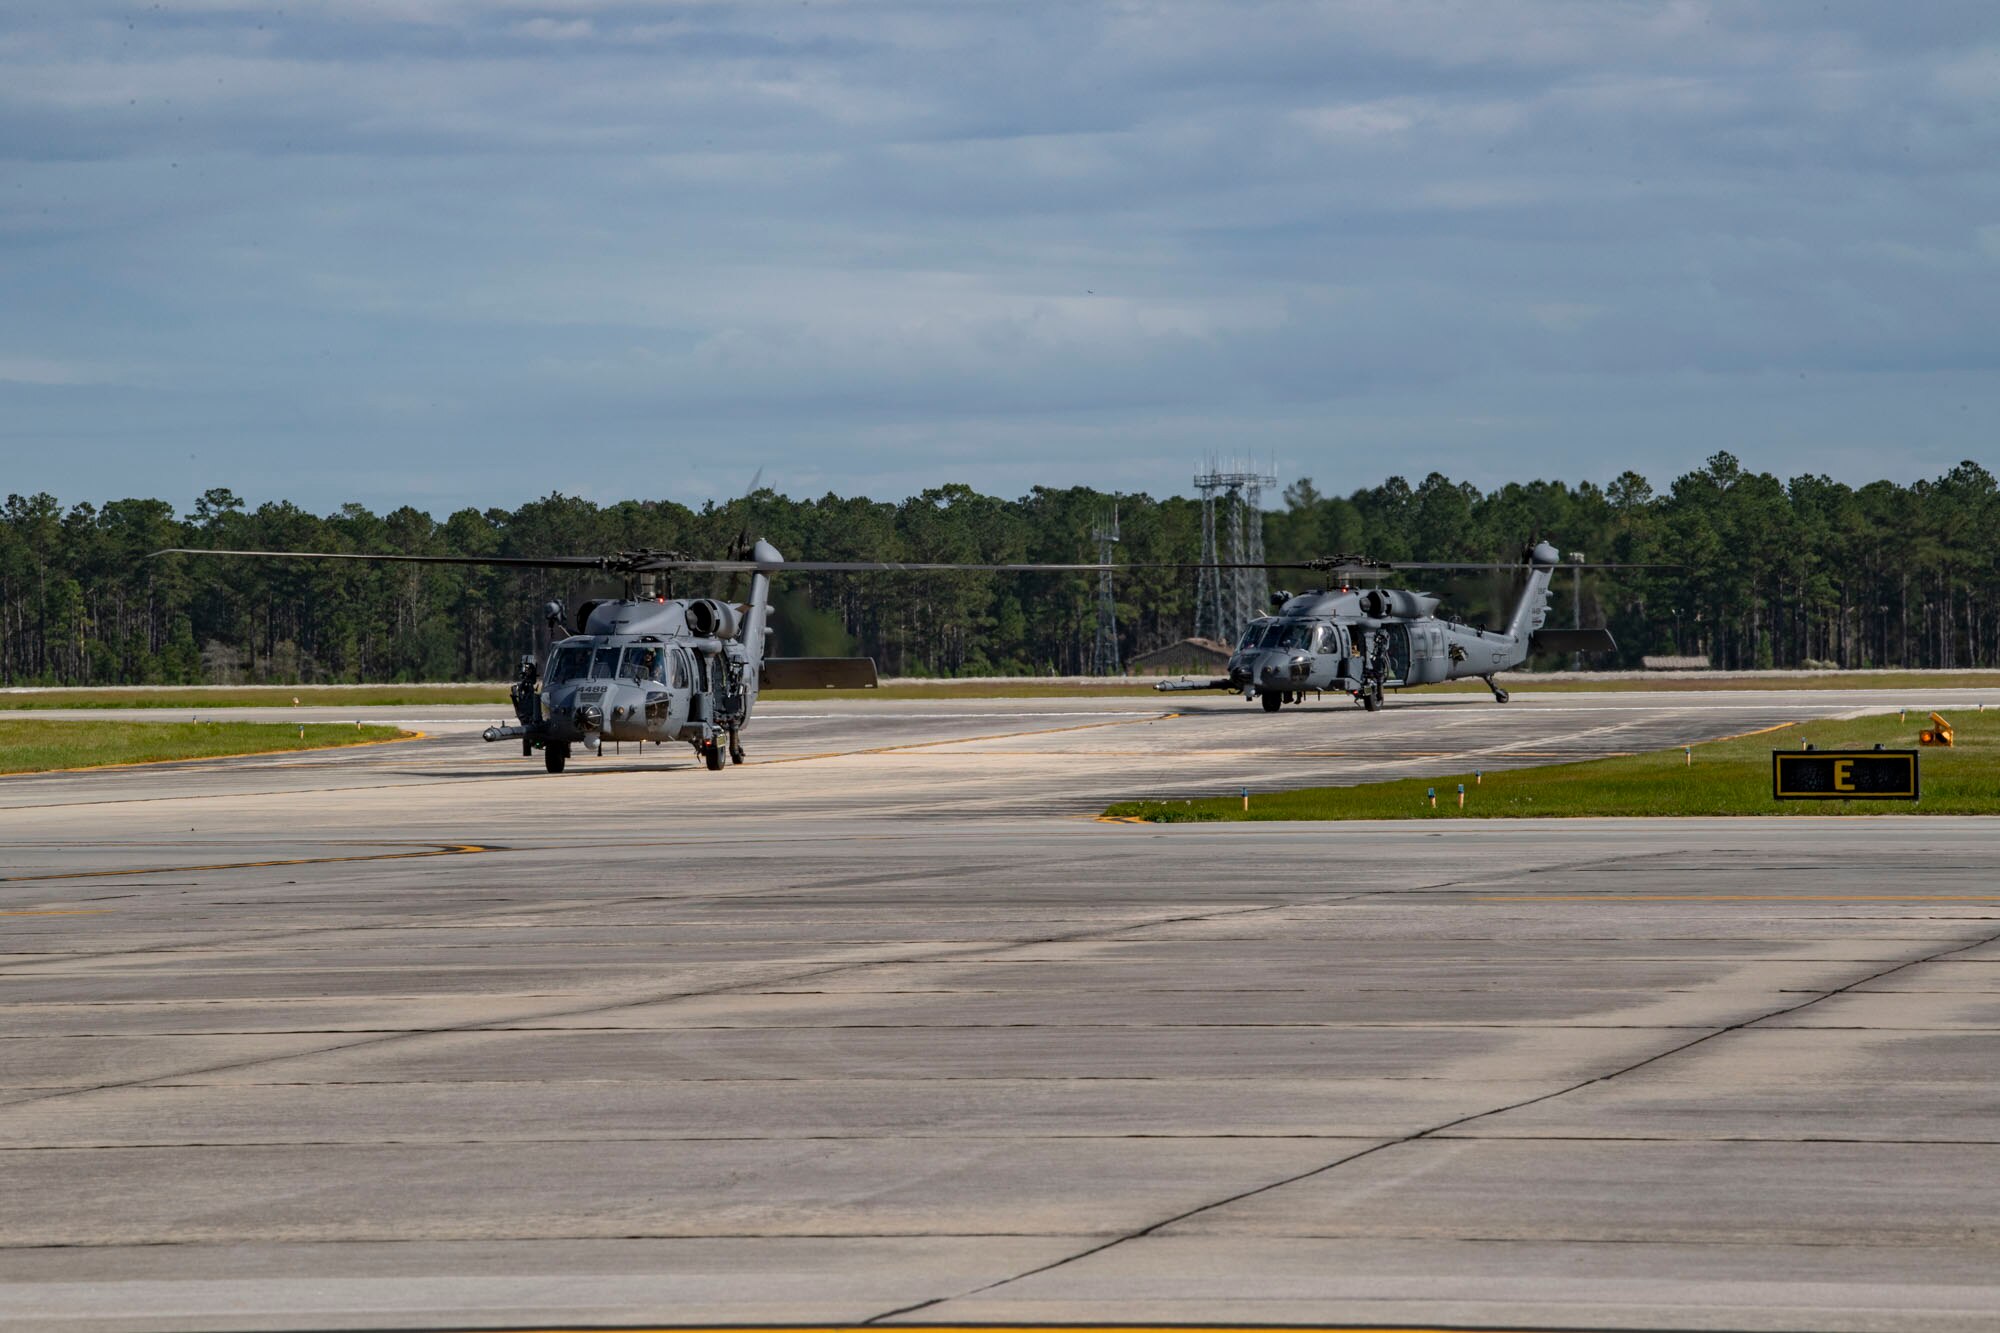 A photo of helicopters taxiing